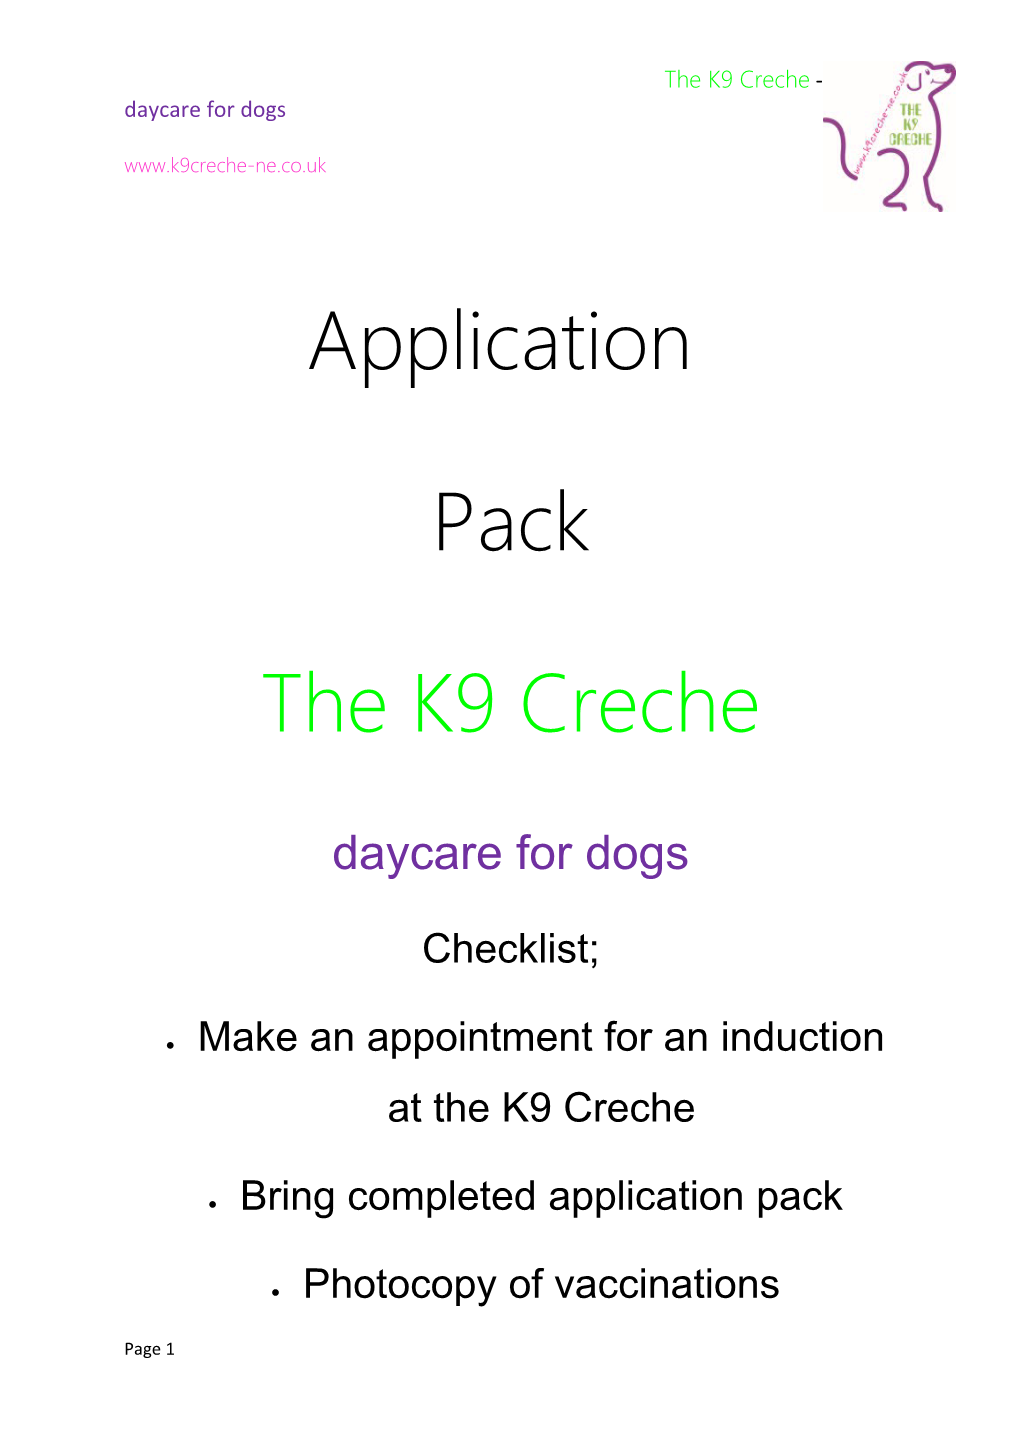 Make an Appointment for an Induction at the K9 Creche